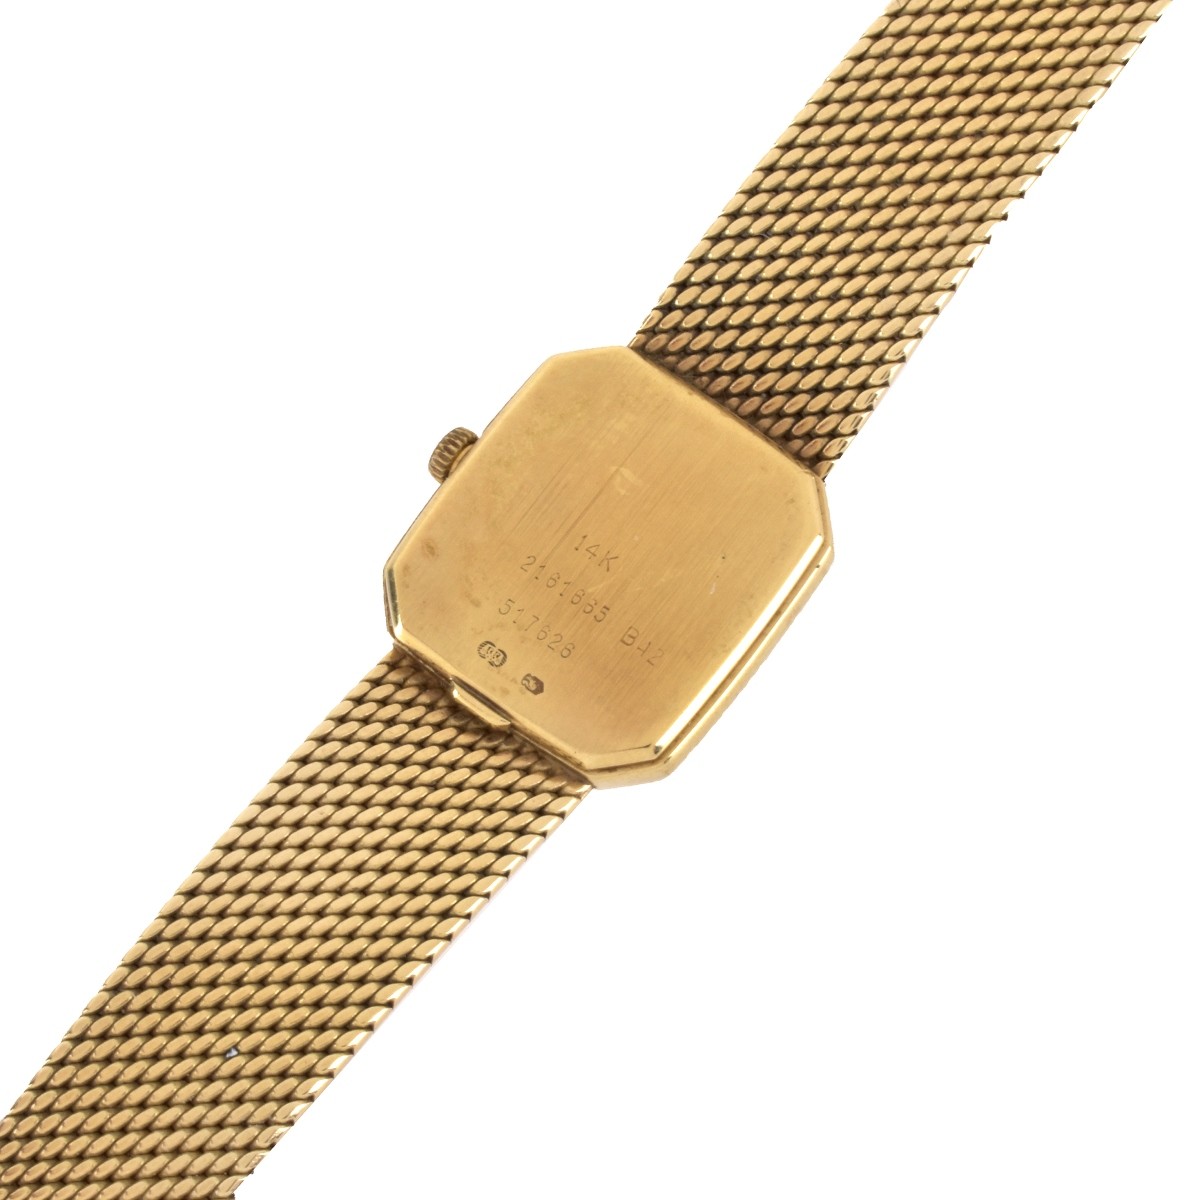 Lady's Concord 14K Watch